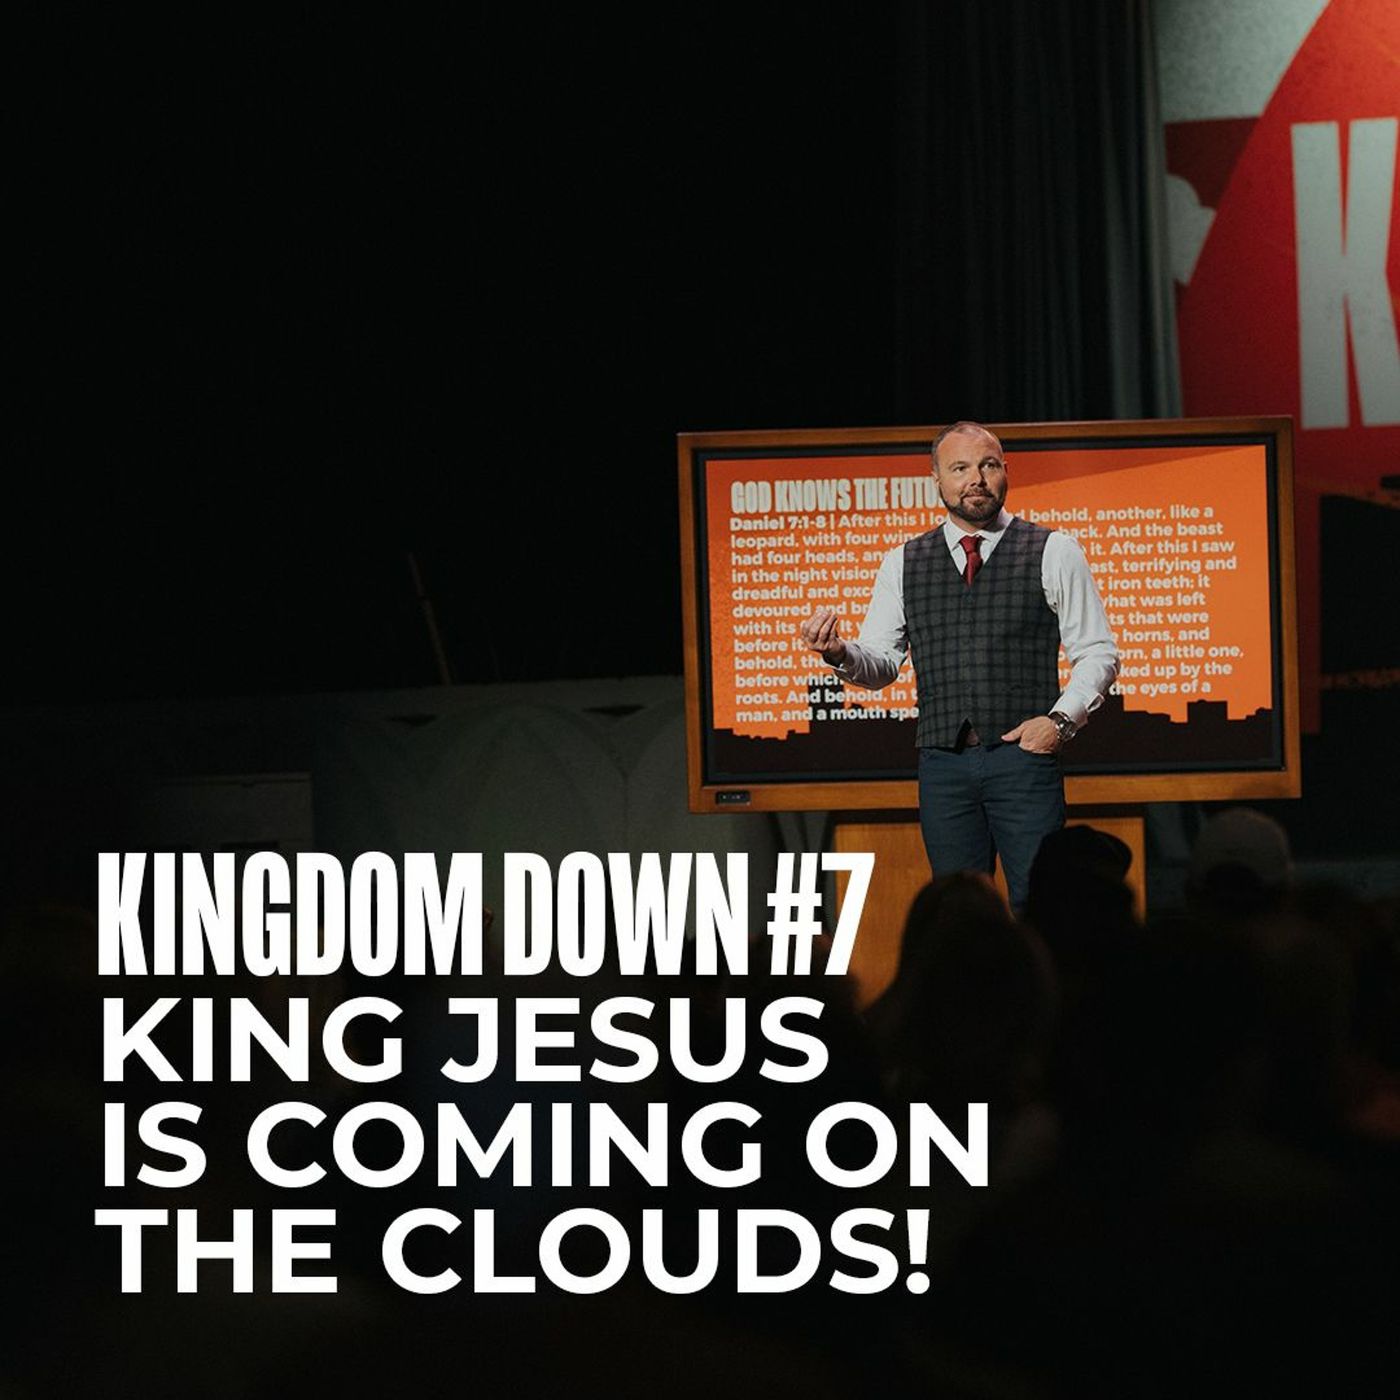 Kingdom Down #7 - King Jesus is Coming on the Clouds!